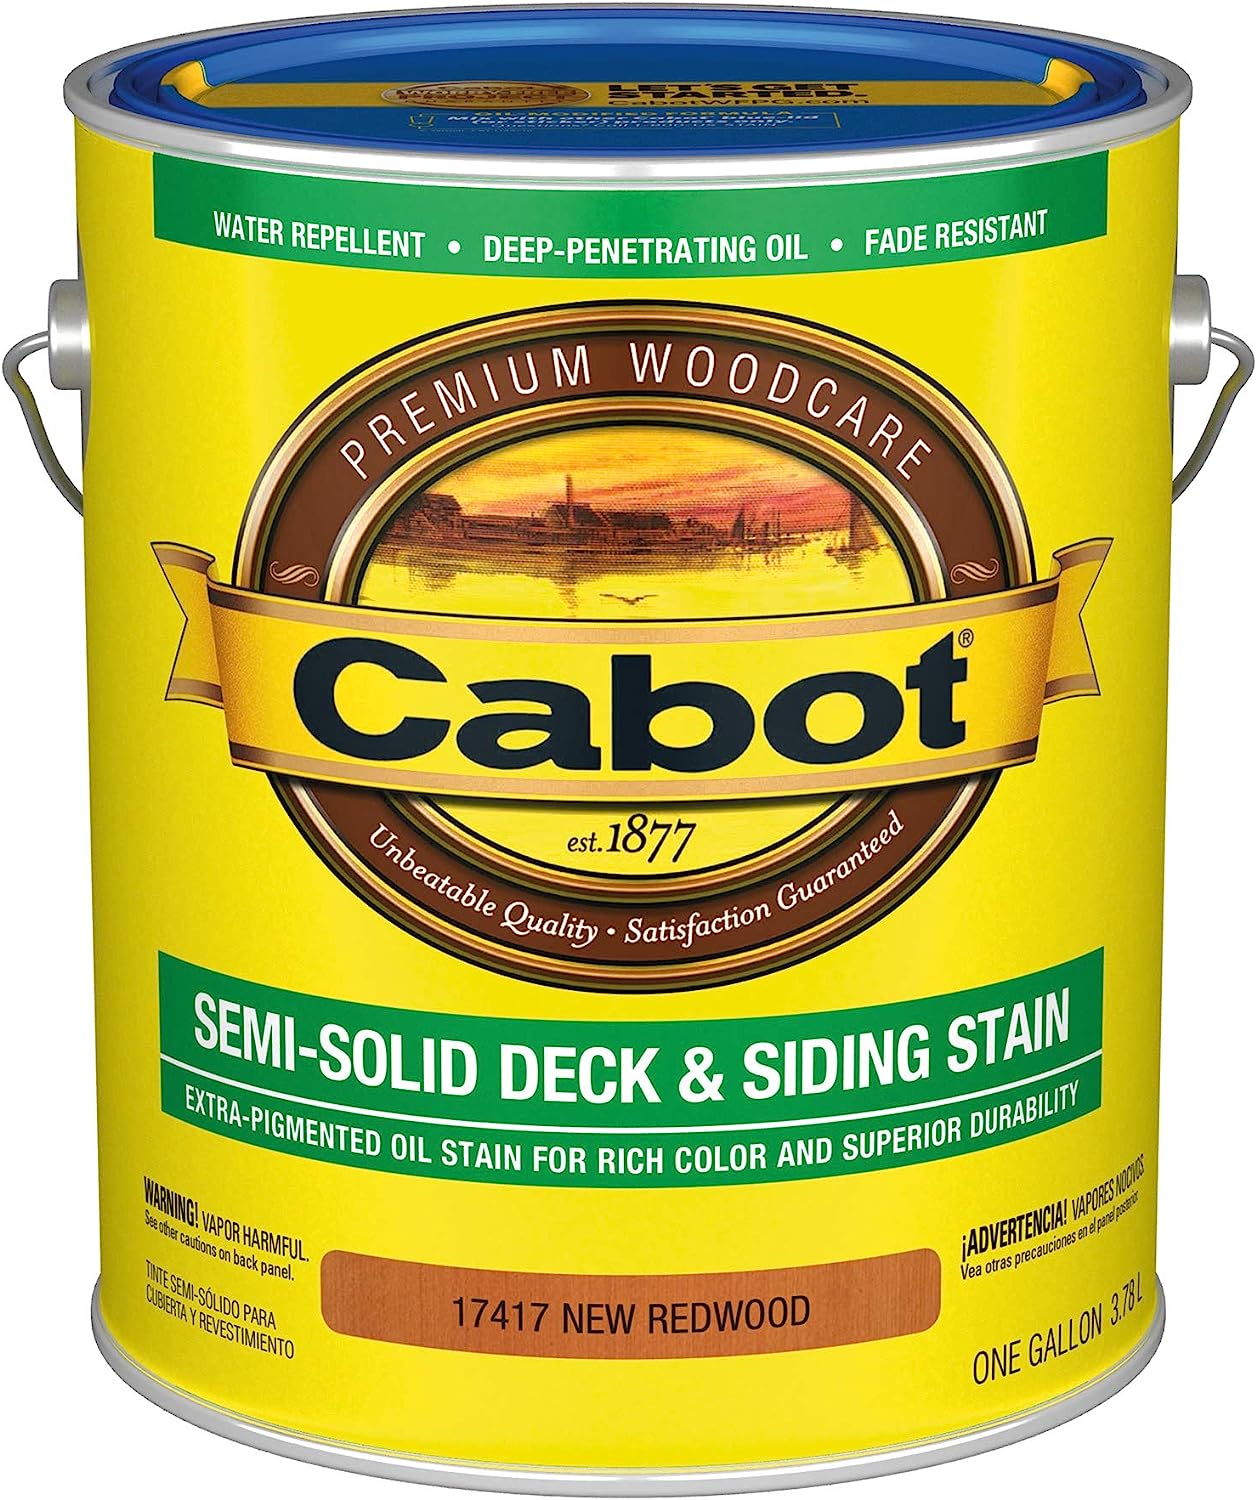 Cabot 140.0017417.007 Semi-Solid Deck & Siding Stain [...]